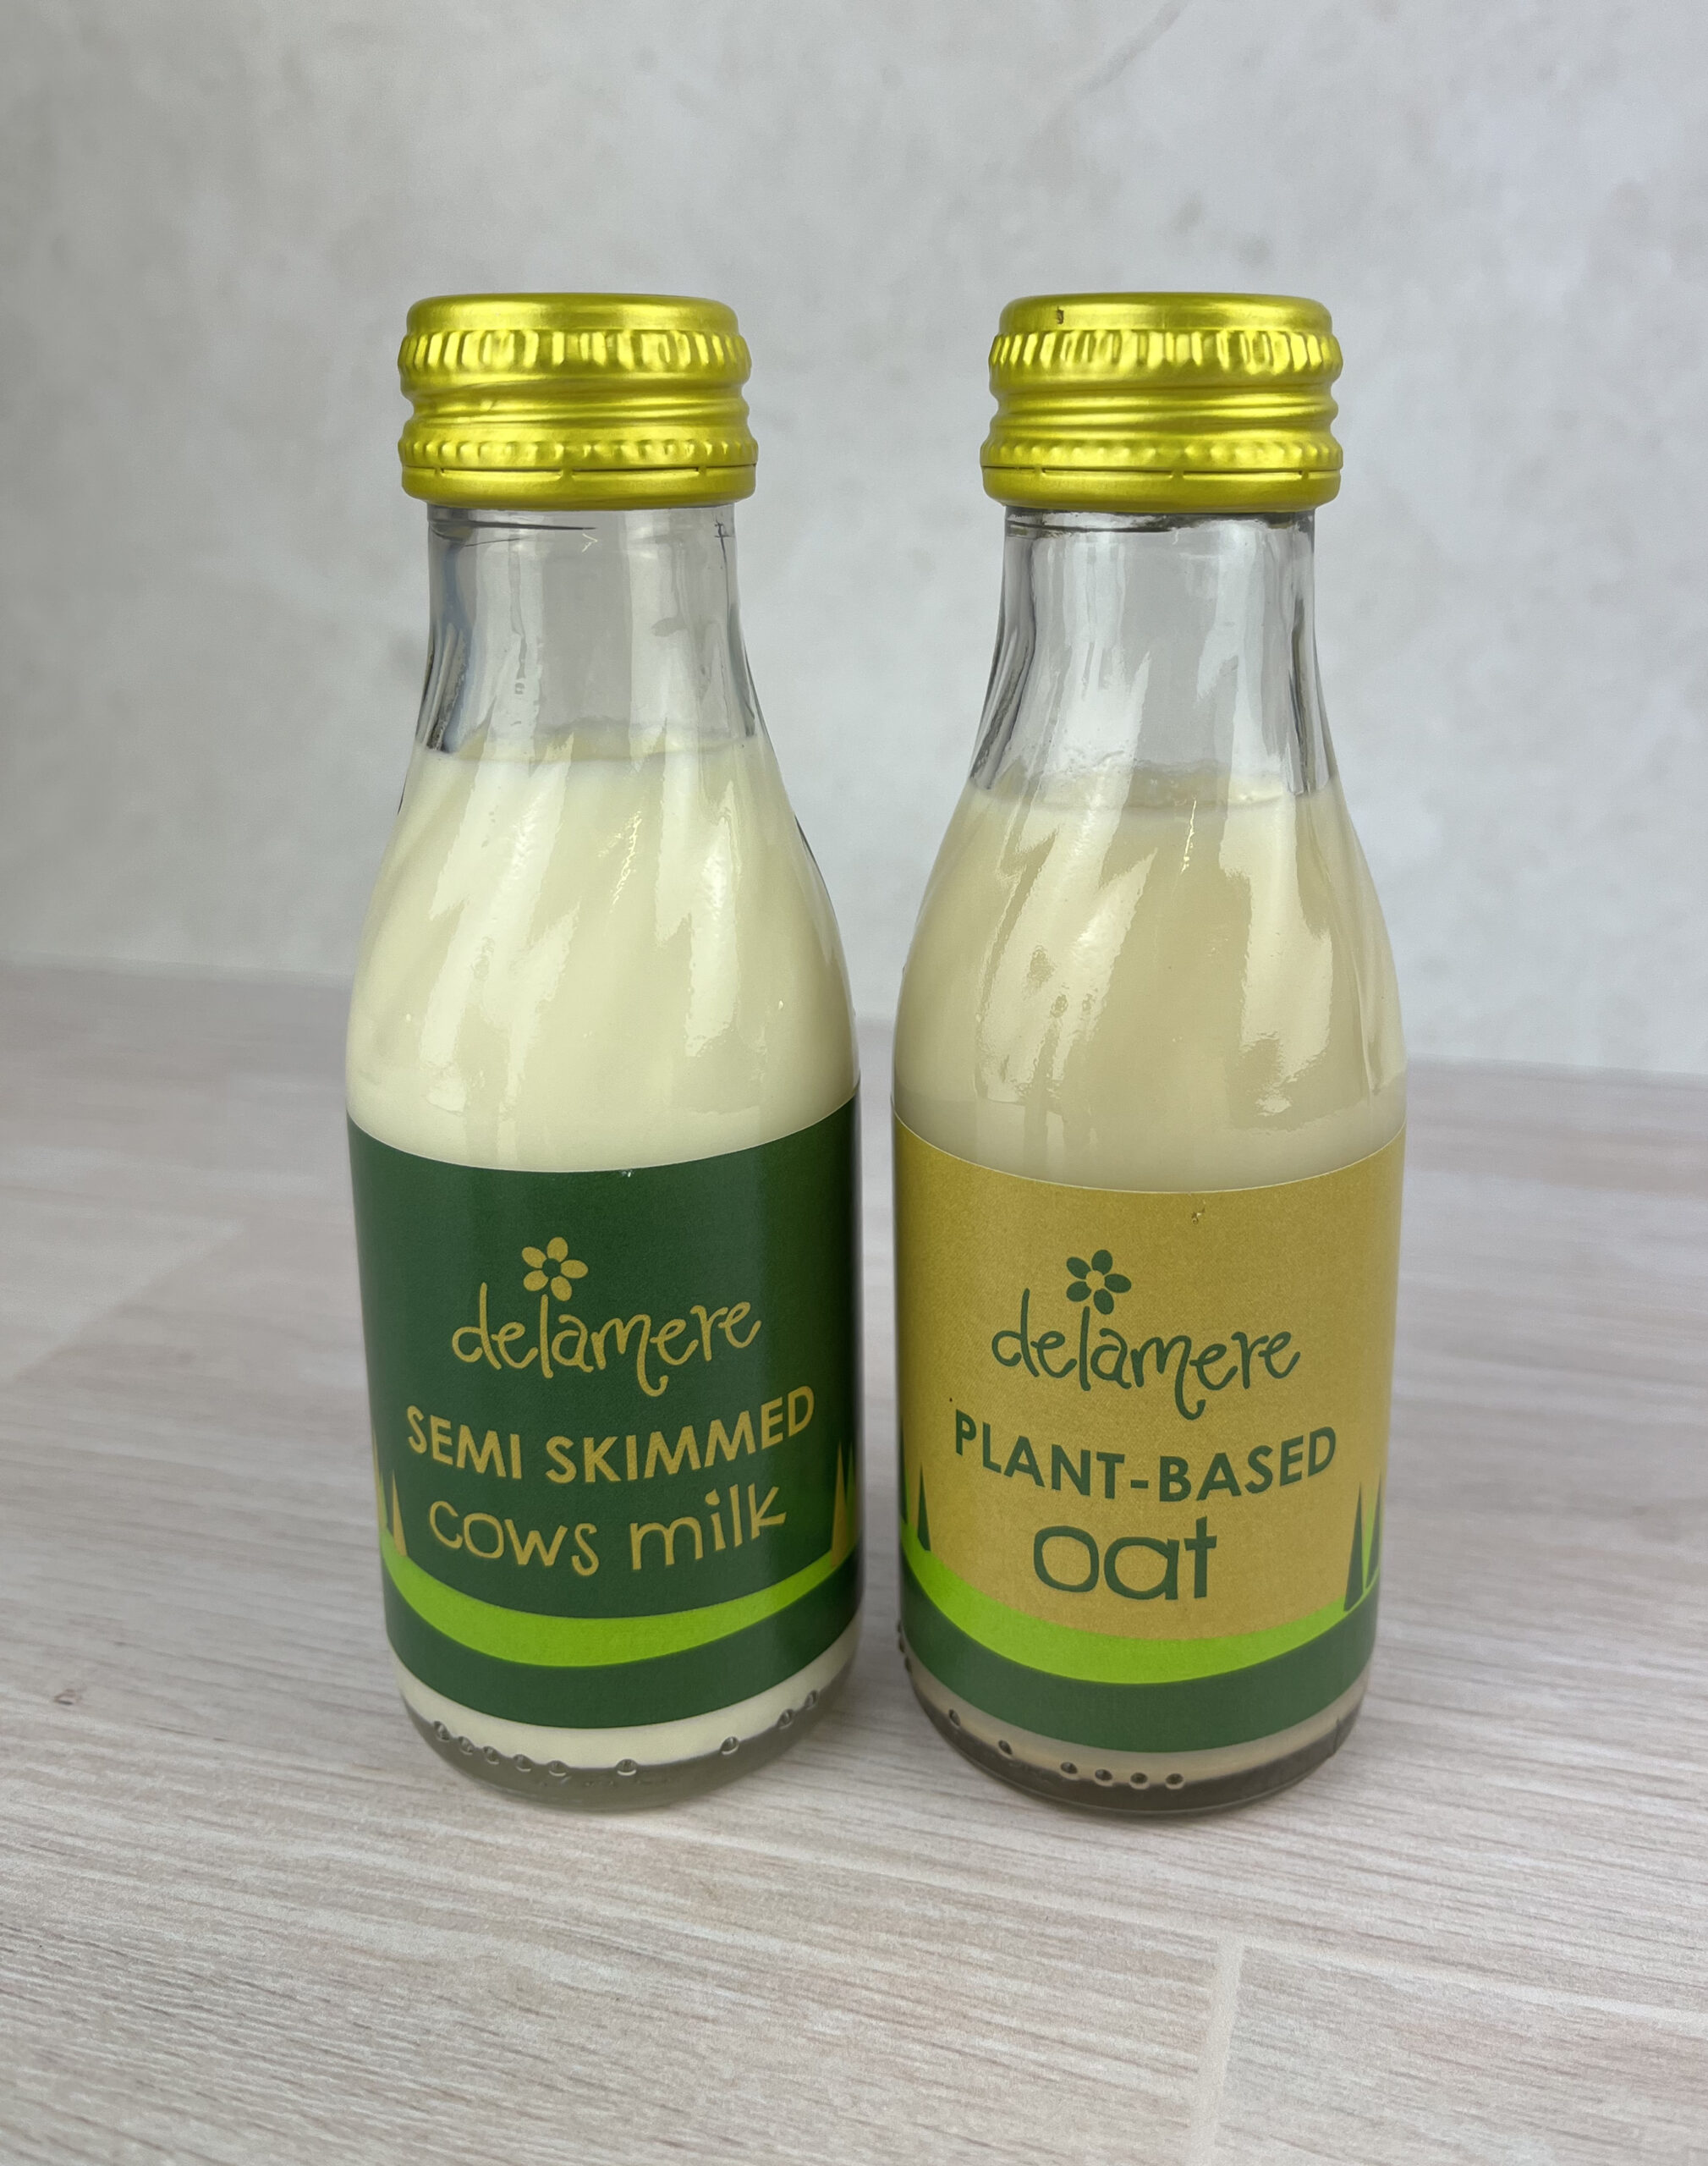 Delamere launches 97ml Oat drink for hospitality industry